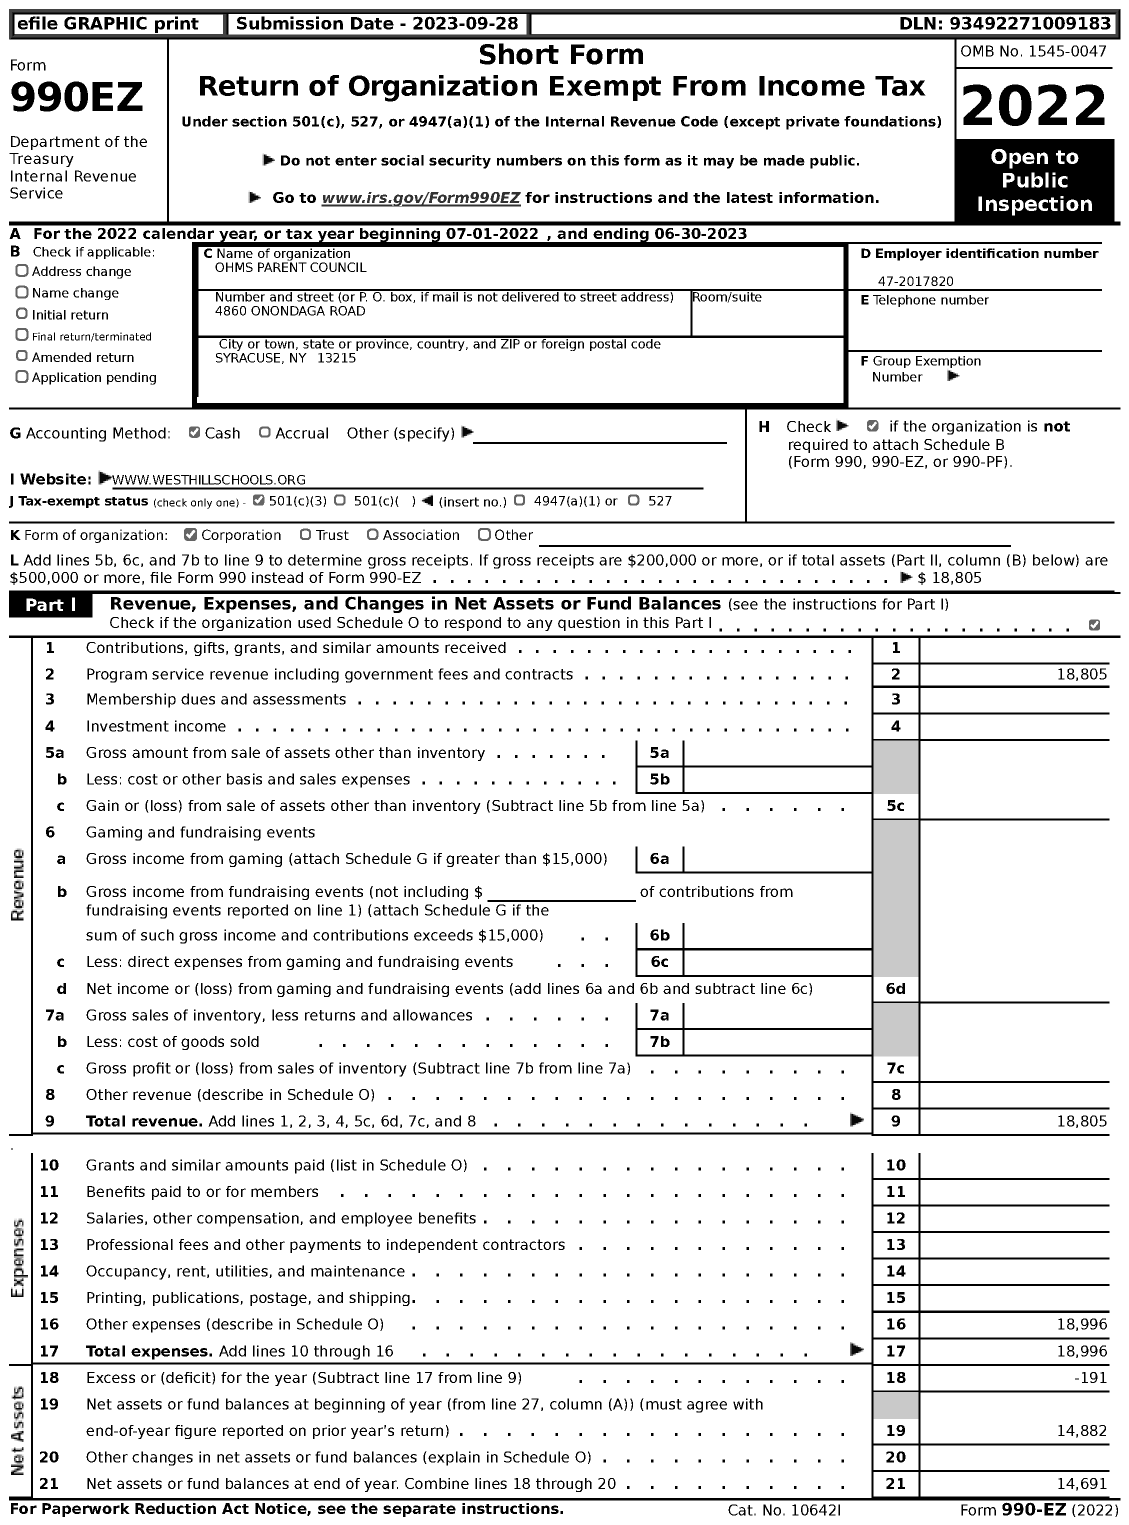 Image of first page of 2022 Form 990EZ for Ohms Parent Council